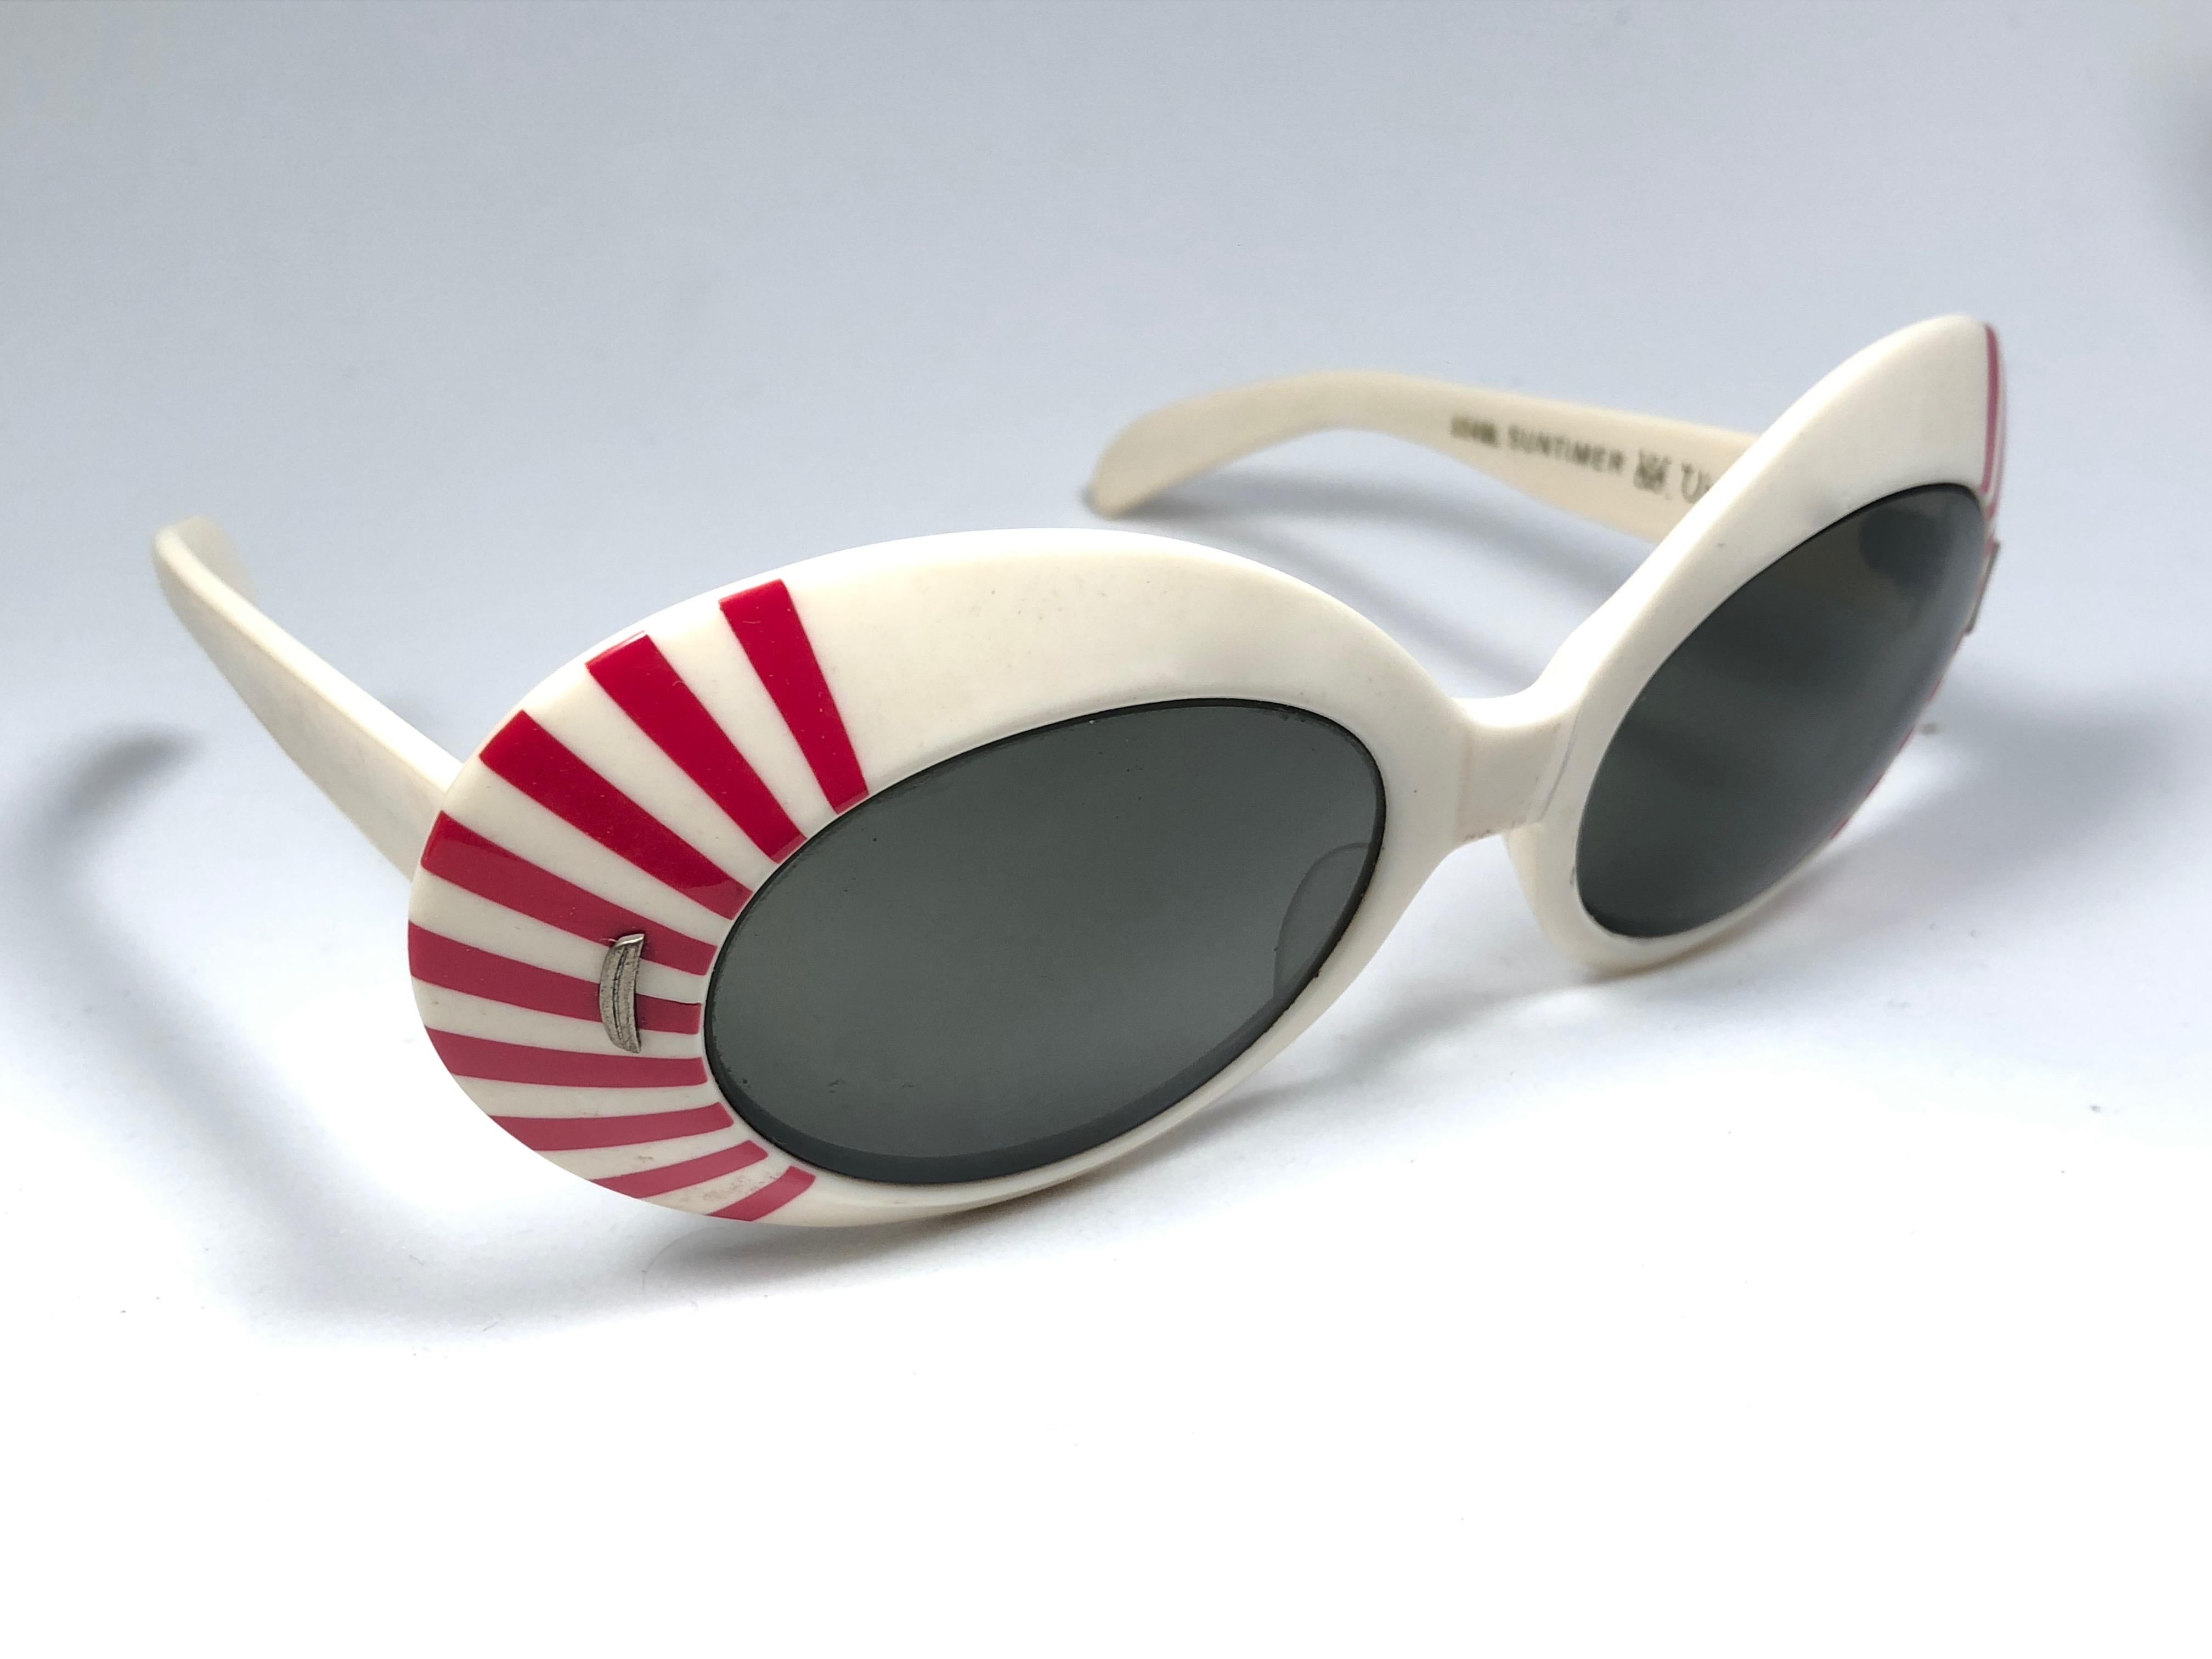 Mint Vintage Suntimer Victory Skimo style sunglasses. Iconic striped frame with G15 grey lenses.

Please notice this item its almost 60 years old and may show minor sign of wear due to storage.

An original and seldom piece.